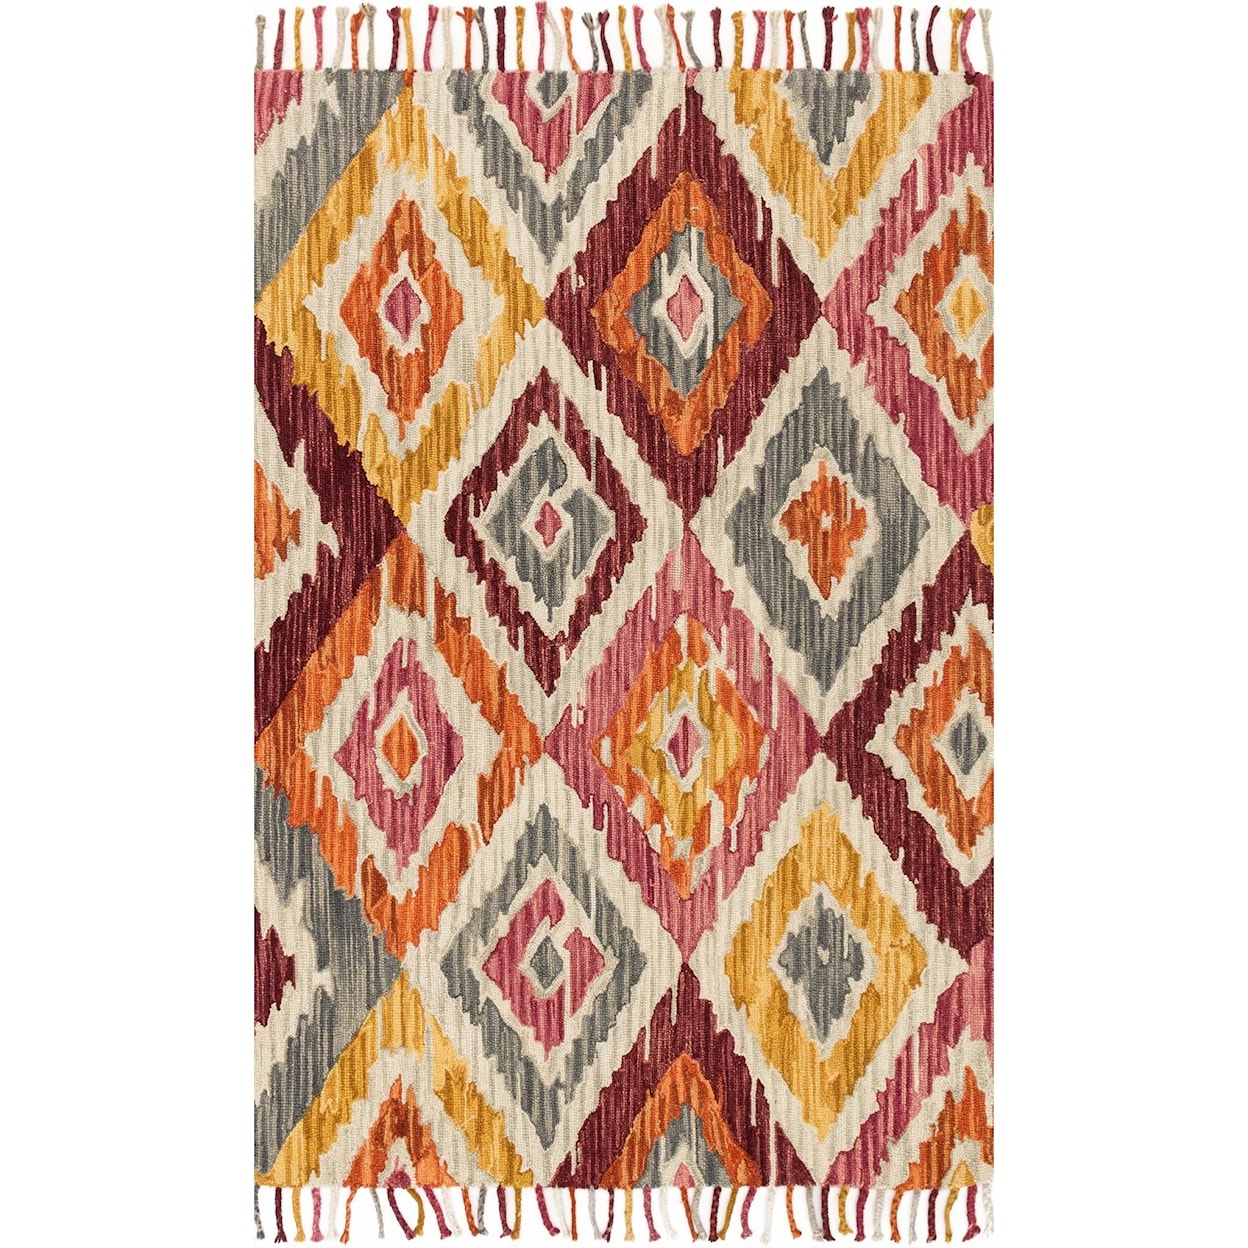 Magnolia Home by Joanna Gaines for Loloi Brushstroke 2' 3" x 3' 9" Rectangle Rug